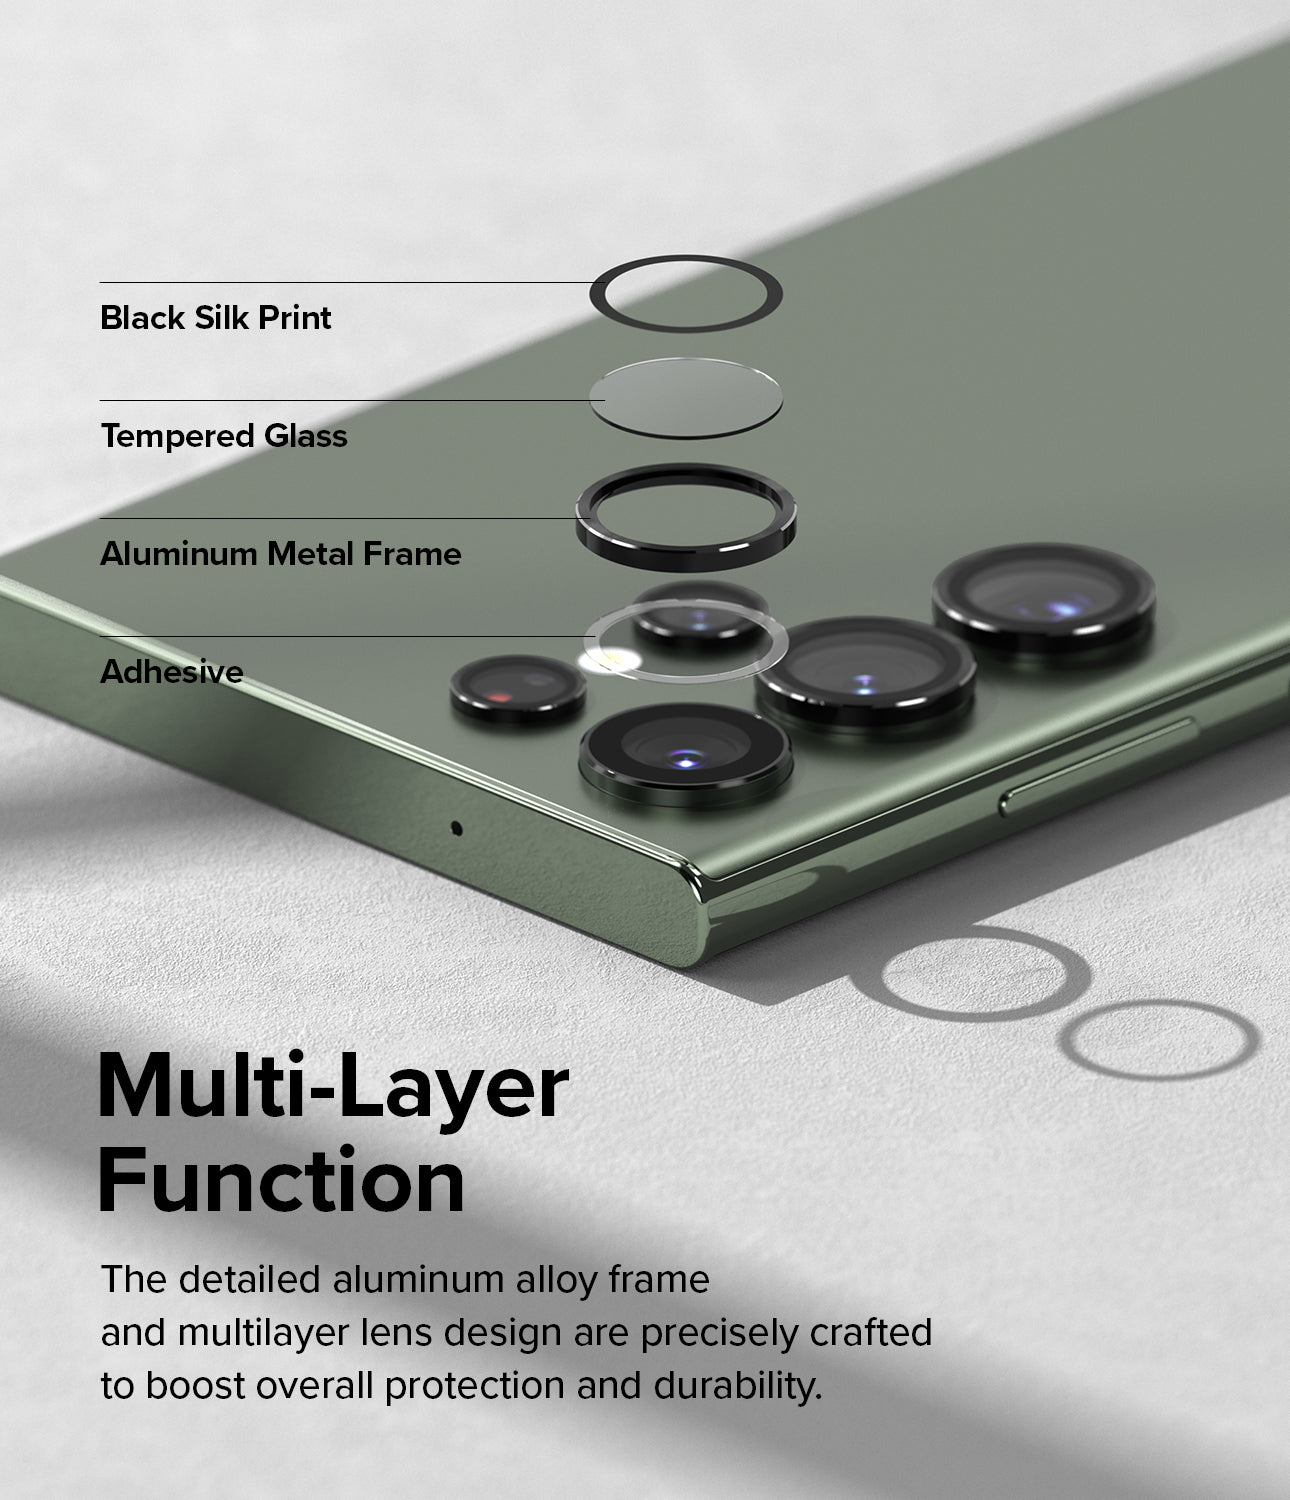 Multi-Layer Function l The detailed aluminum alloy frame and multilayer lens design are precisely crafted to boost overall protection and durability.